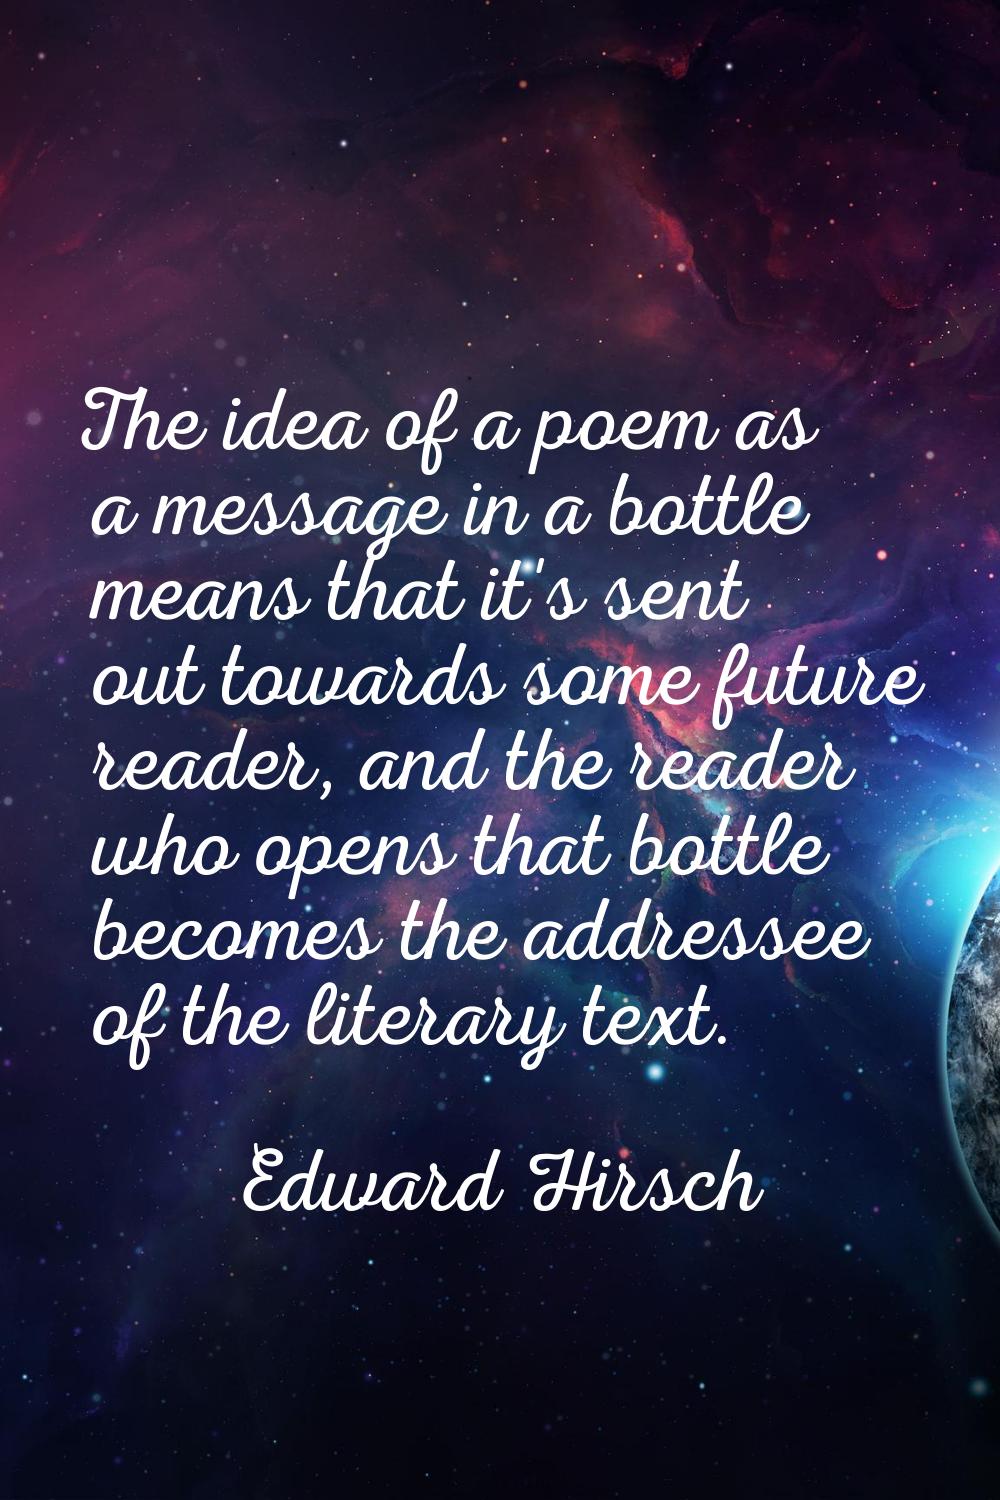 The idea of a poem as a message in a bottle means that it's sent out towards some future reader, an